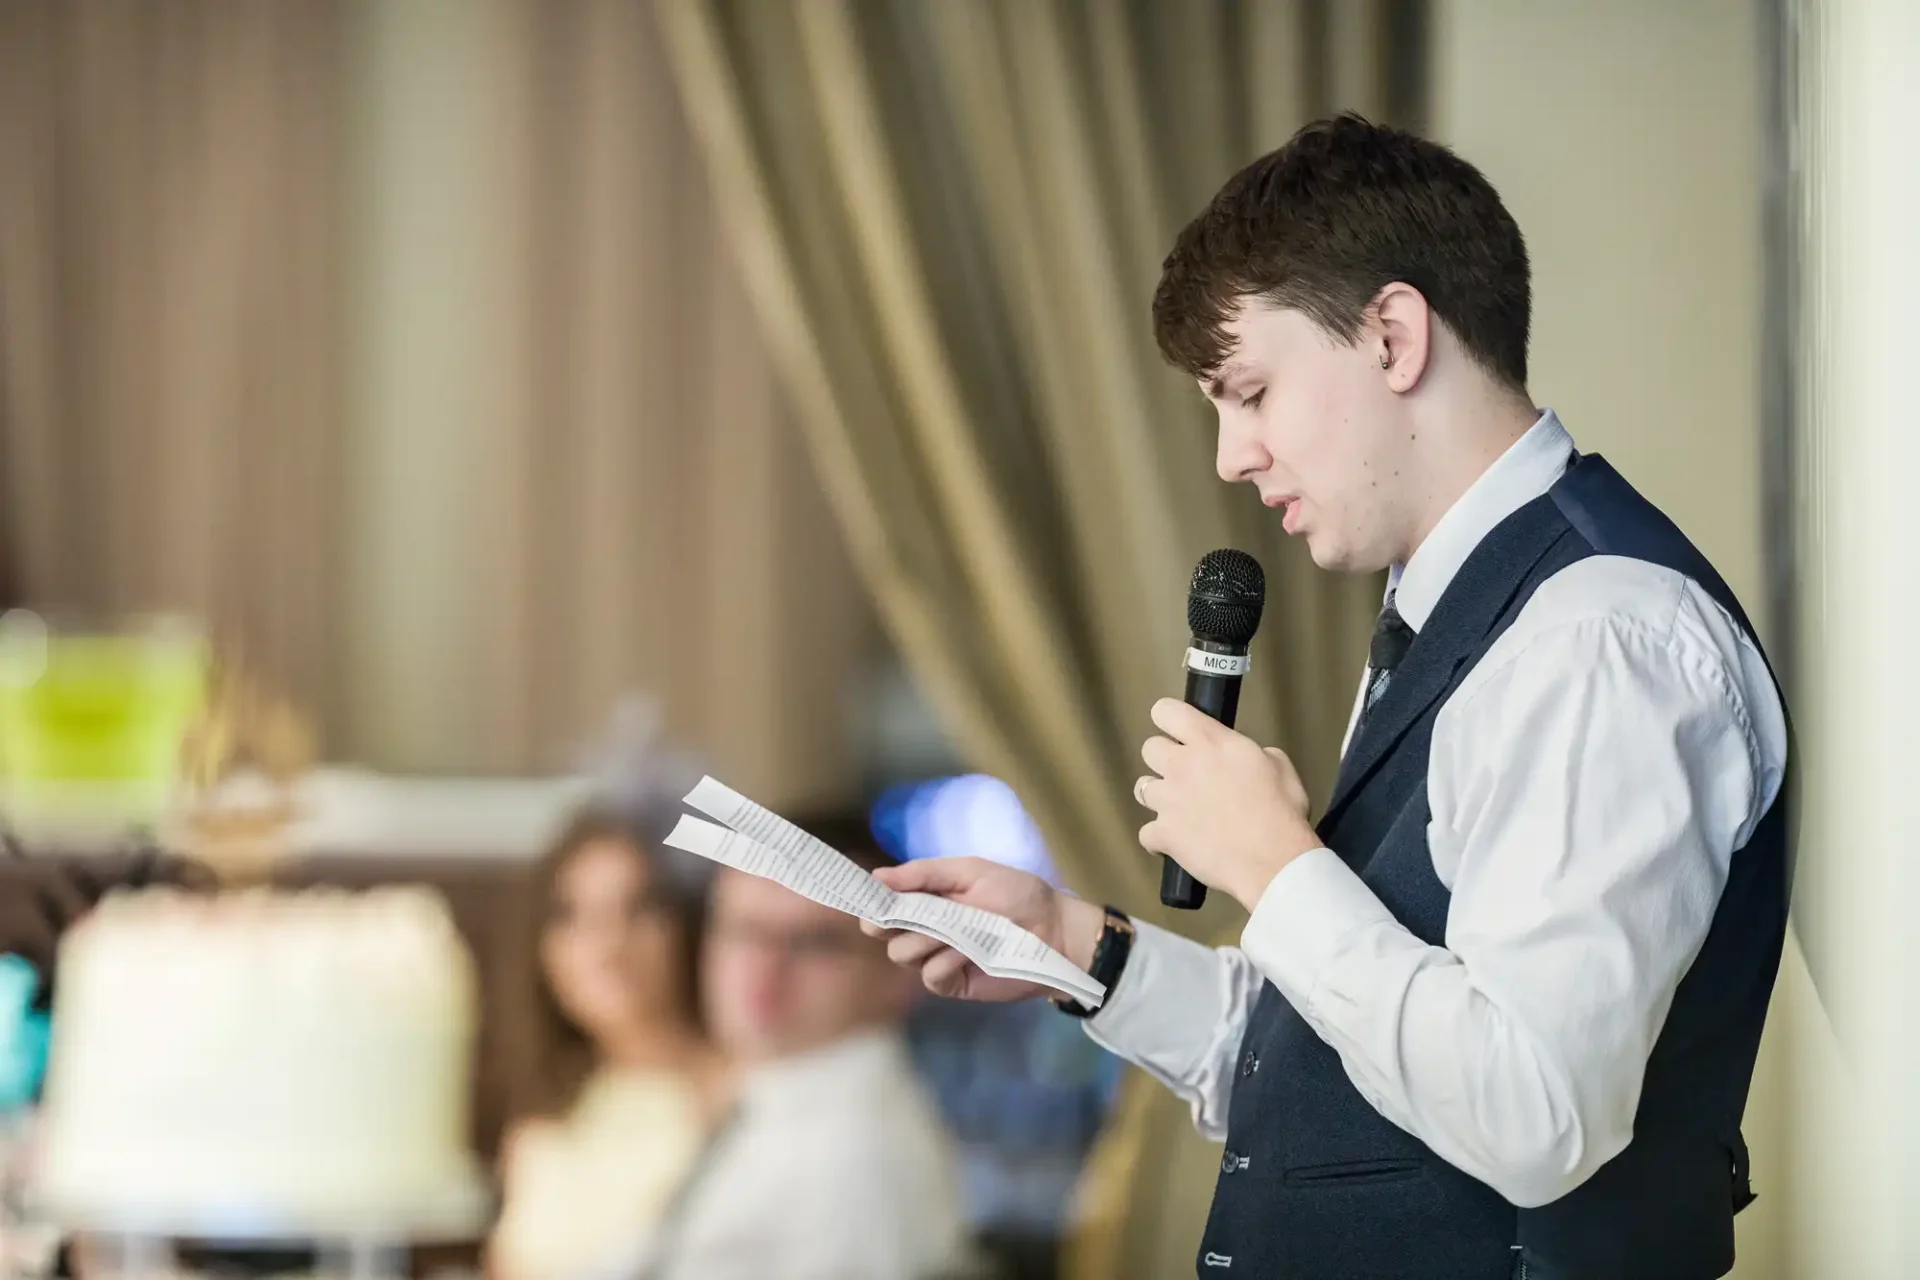 A young man in a vest and tie speaks into a microphone while reading from a paper at an indoor event.